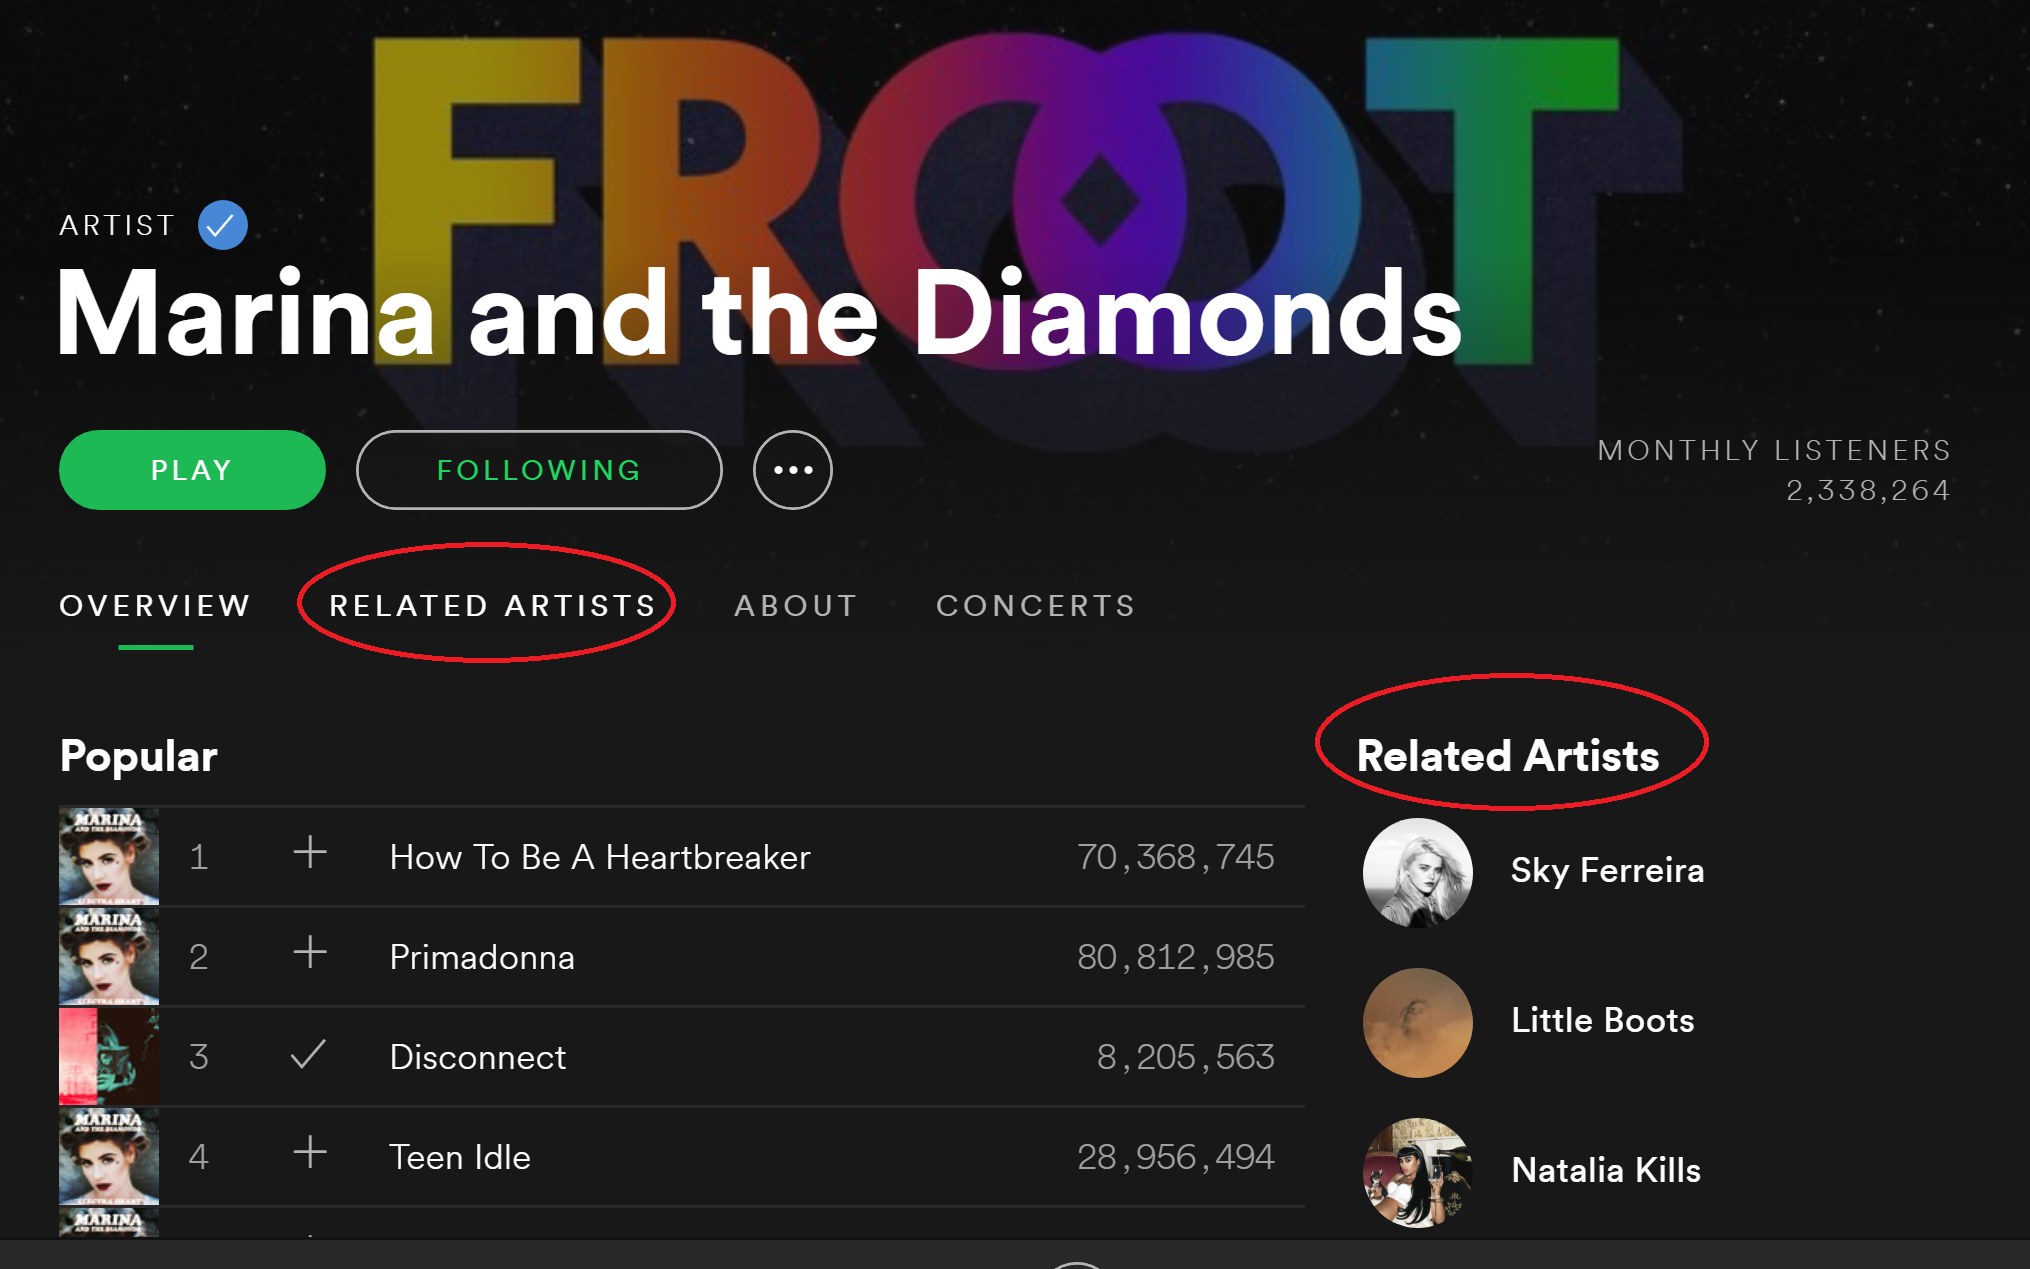 related artists